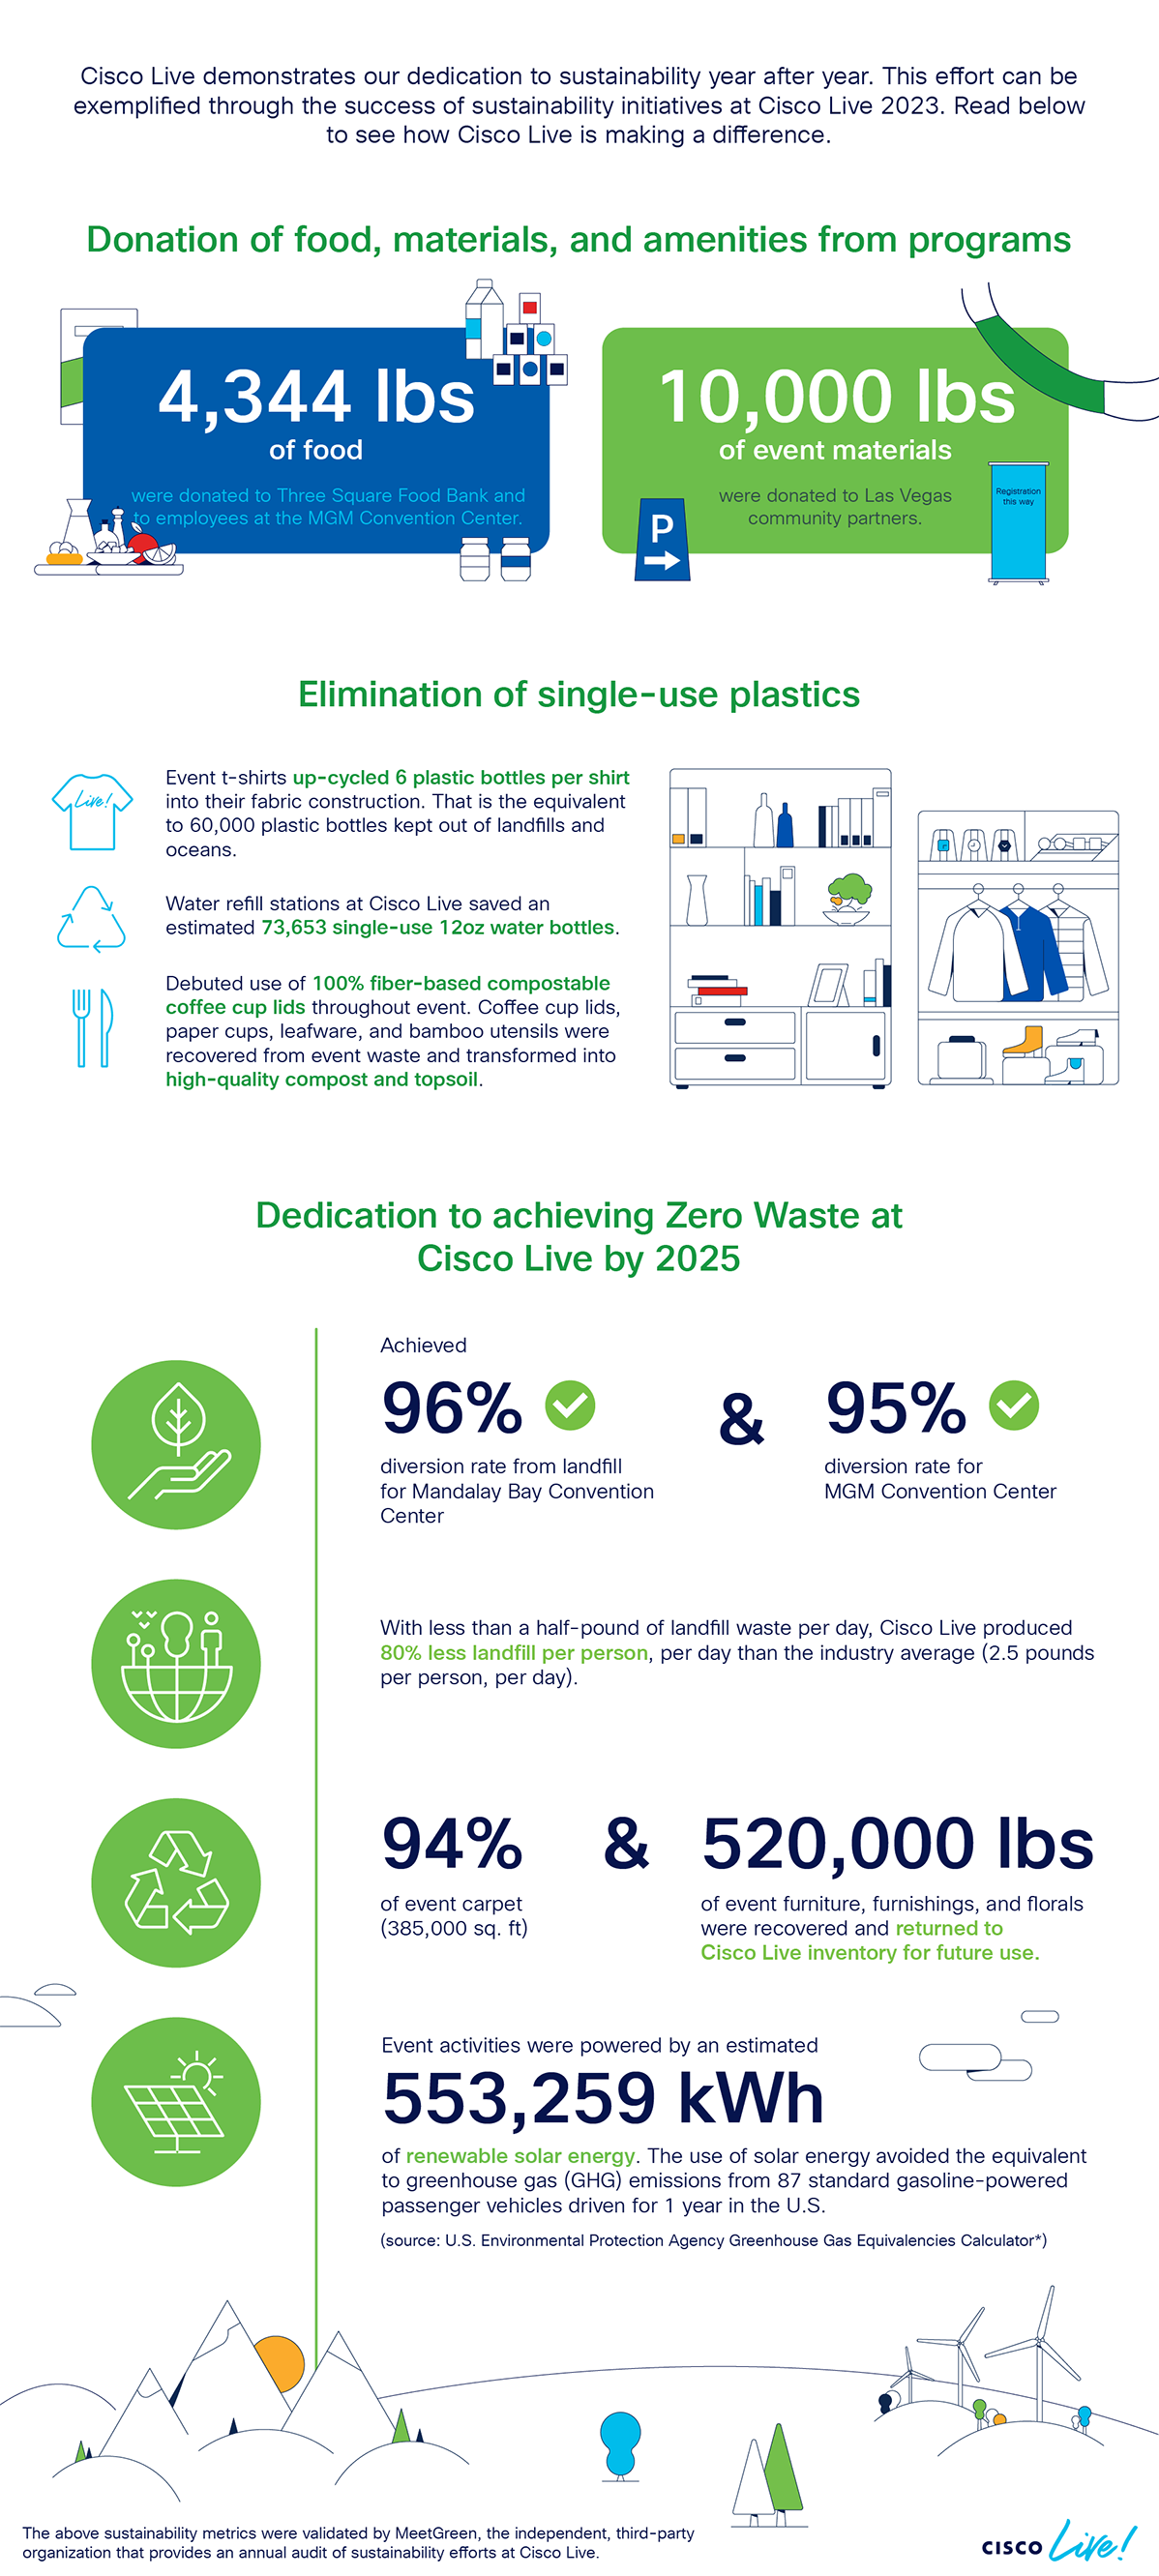 Cisco Live demonstrates our dedication to sustainability year after year. This effort can be exemplified through the success of sustainability initiatives at Cisco Live 2023.